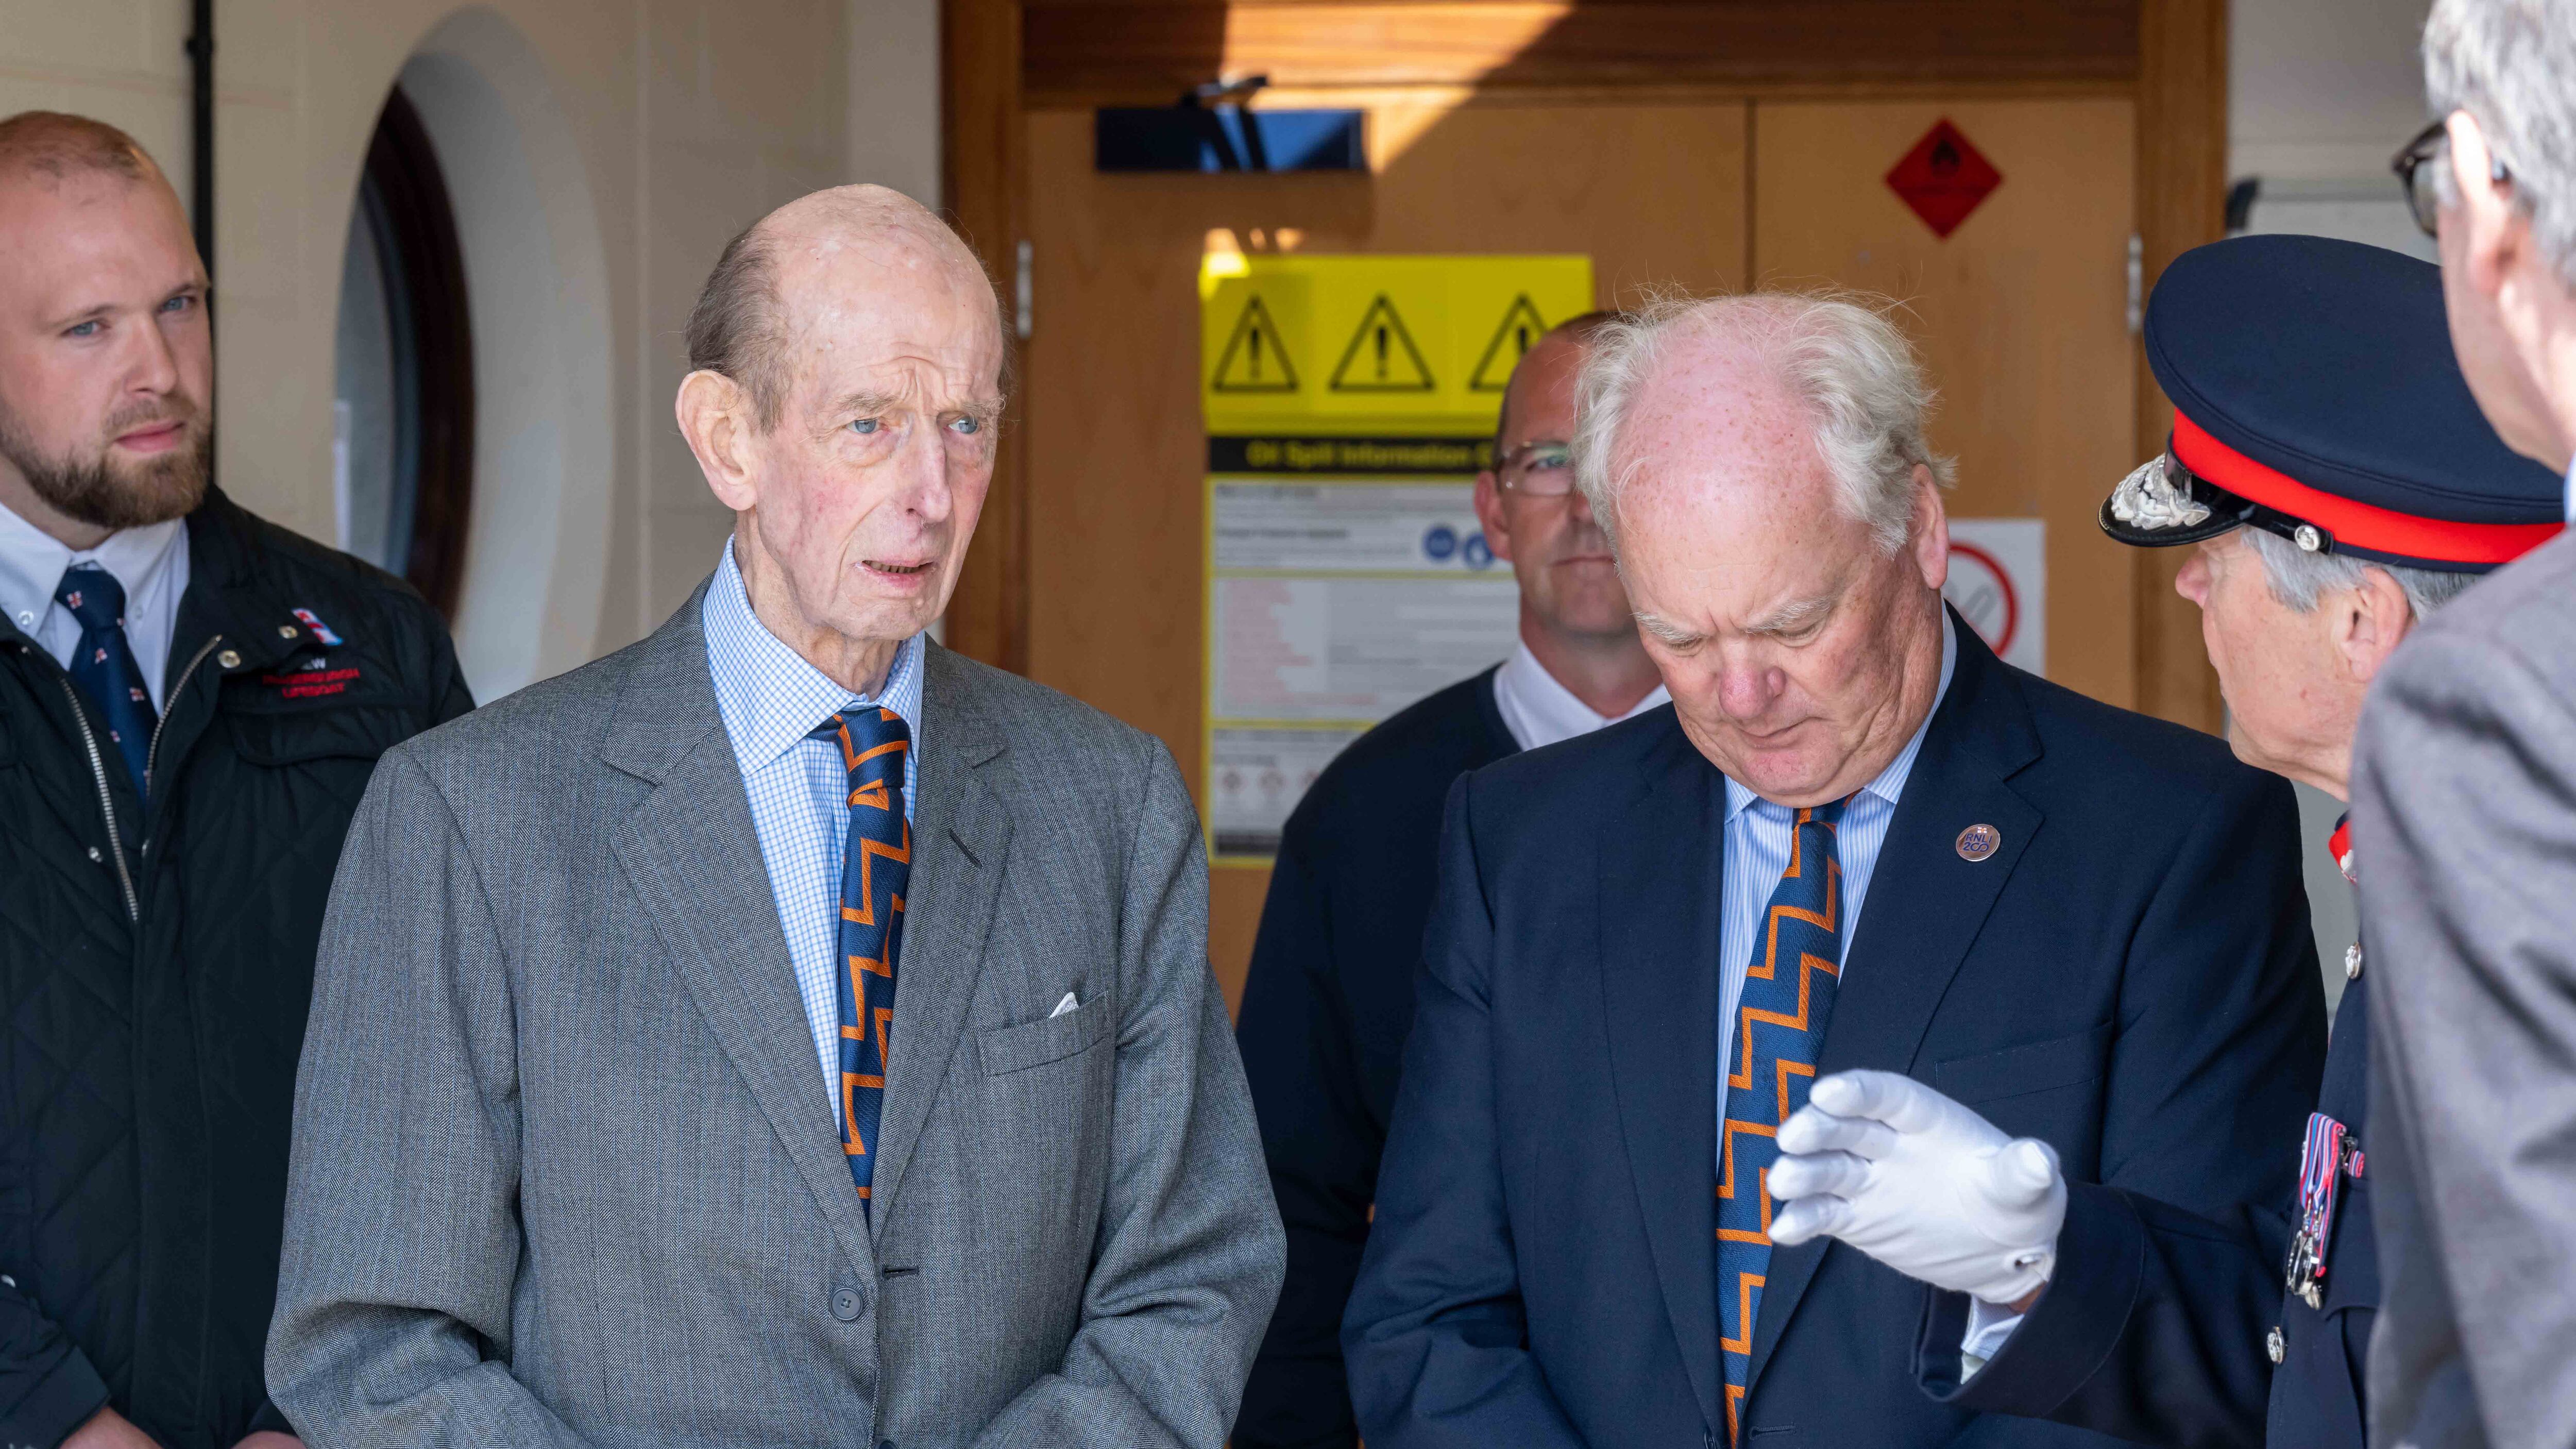 The Duke of Kent, president of the RNLI, during his visit to the Fraserburgh lifeboat station